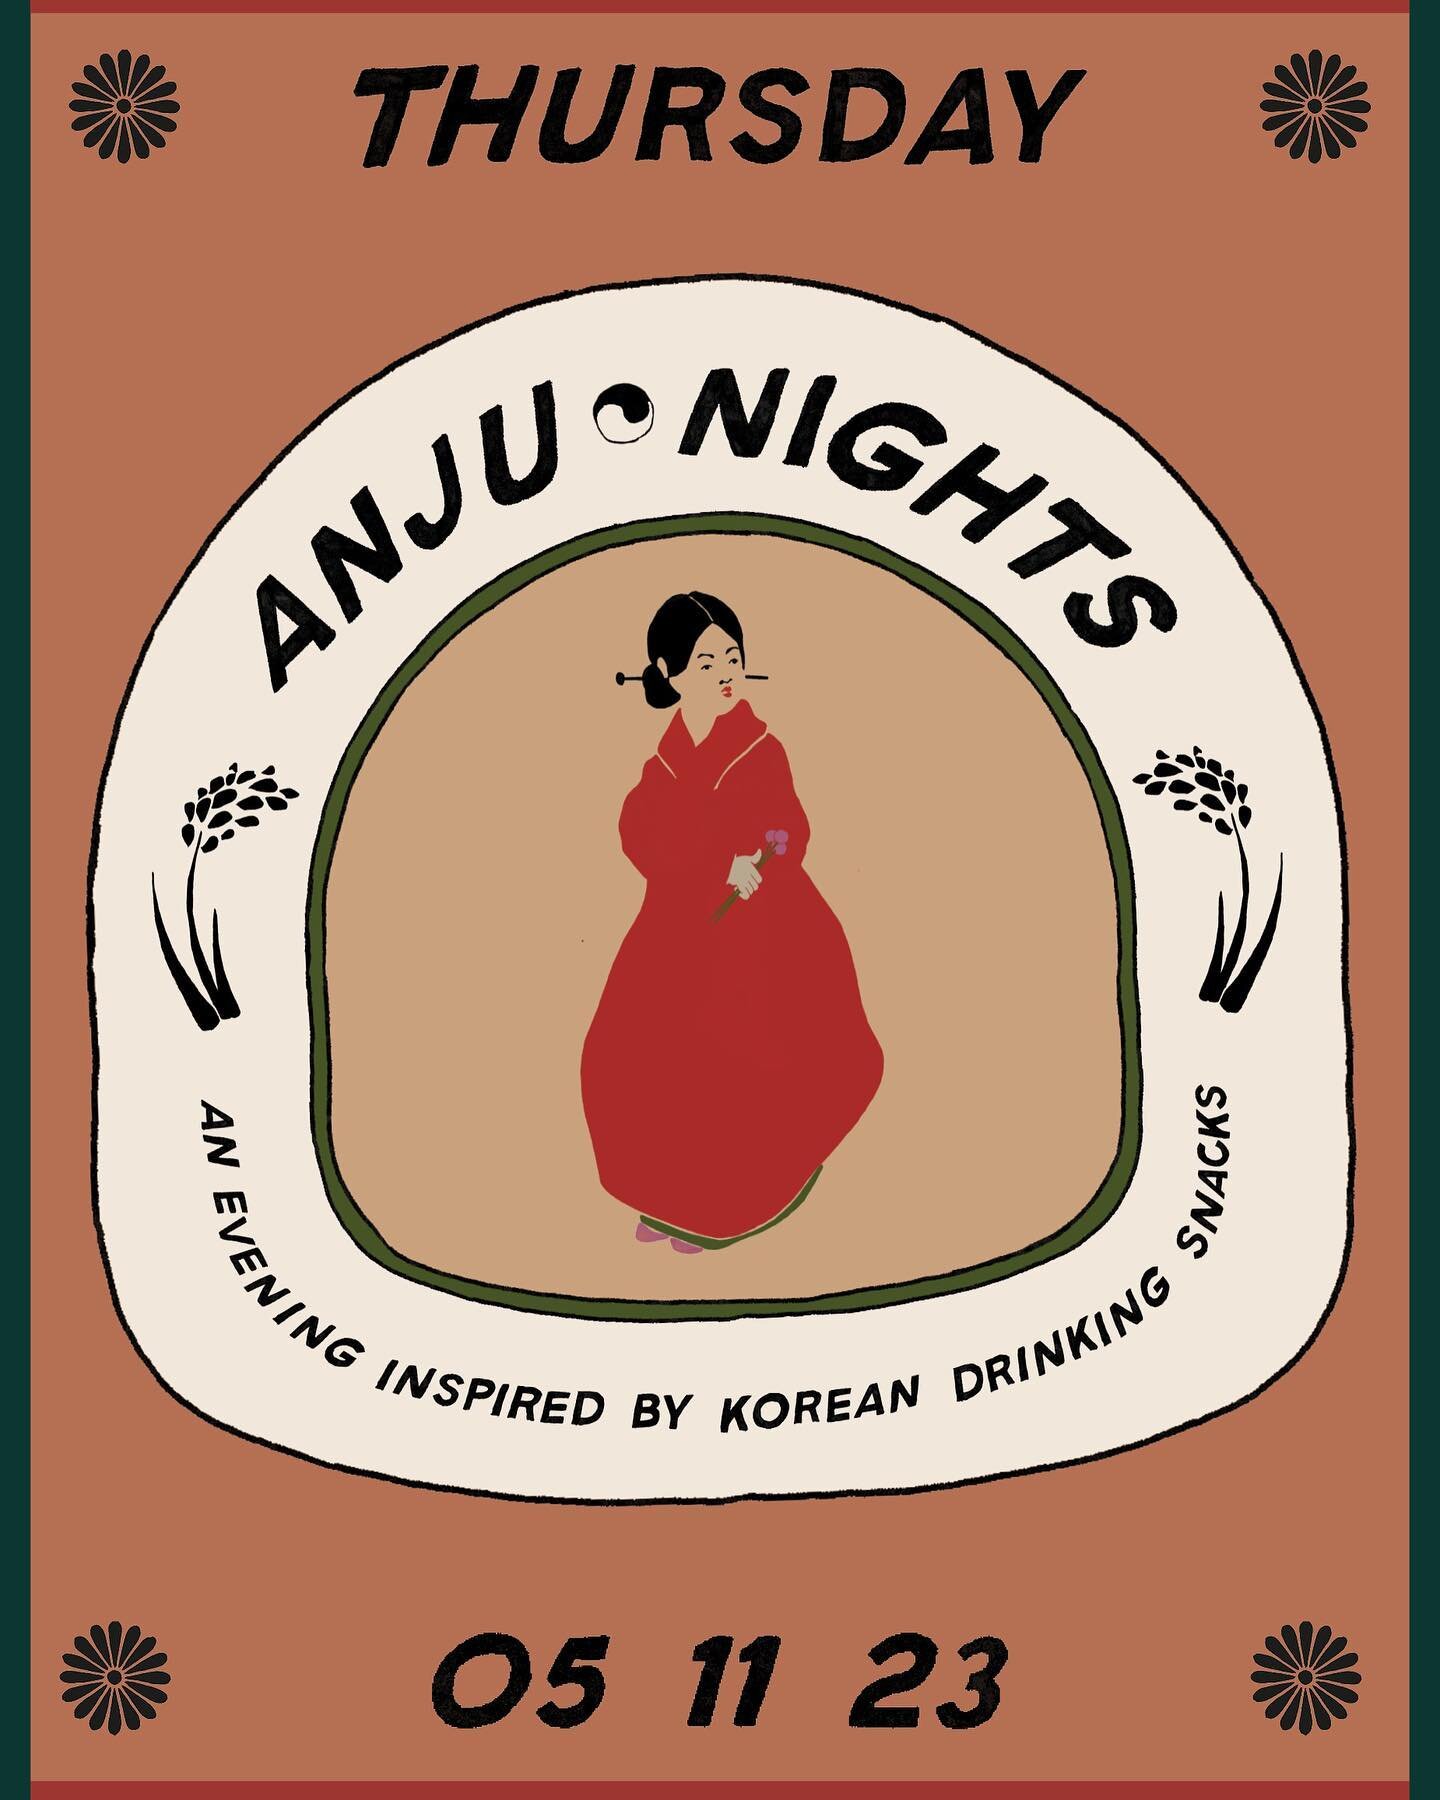 in the spirit of korea&rsquo;s drinking culture, we&rsquo;re excited to launch Anju Nights our weekly ALL NIGHT anju-style happy hour every thursday starting may 11th.

in korea, there is no drinking without food and anju can span from small snacks t